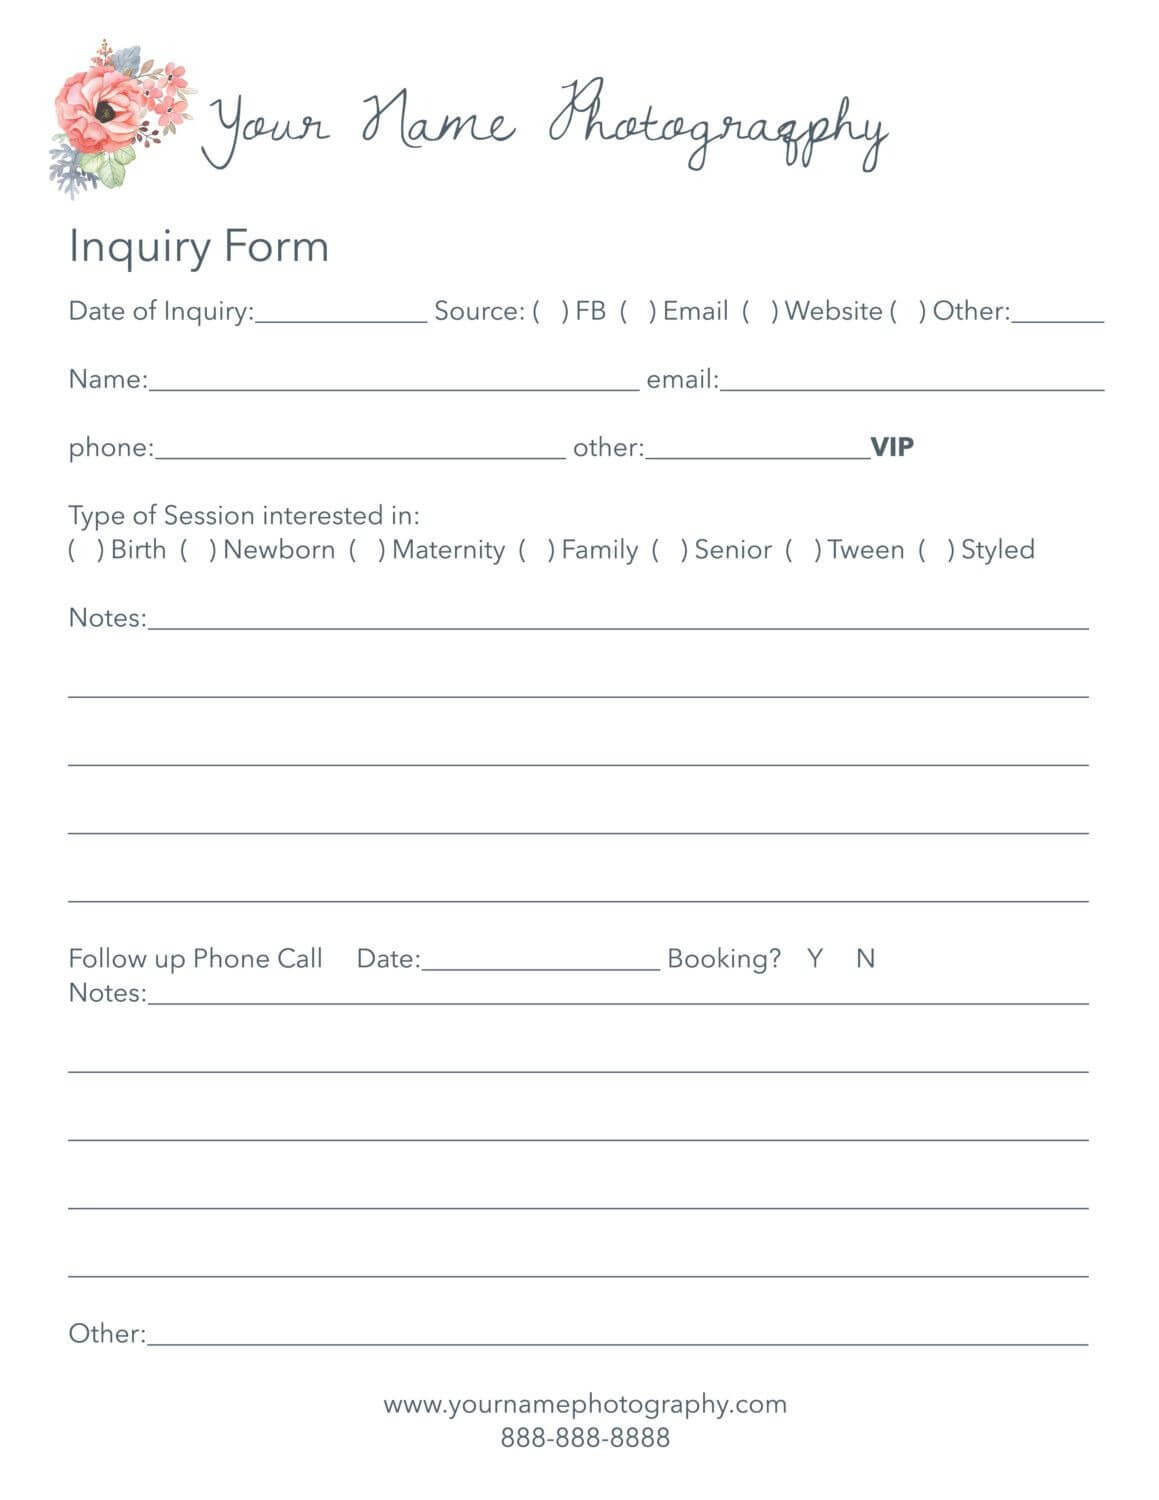 $5.00 Photography Inquiry Form, Inquiry Log, Client Log. With Enquiry Form Template Word